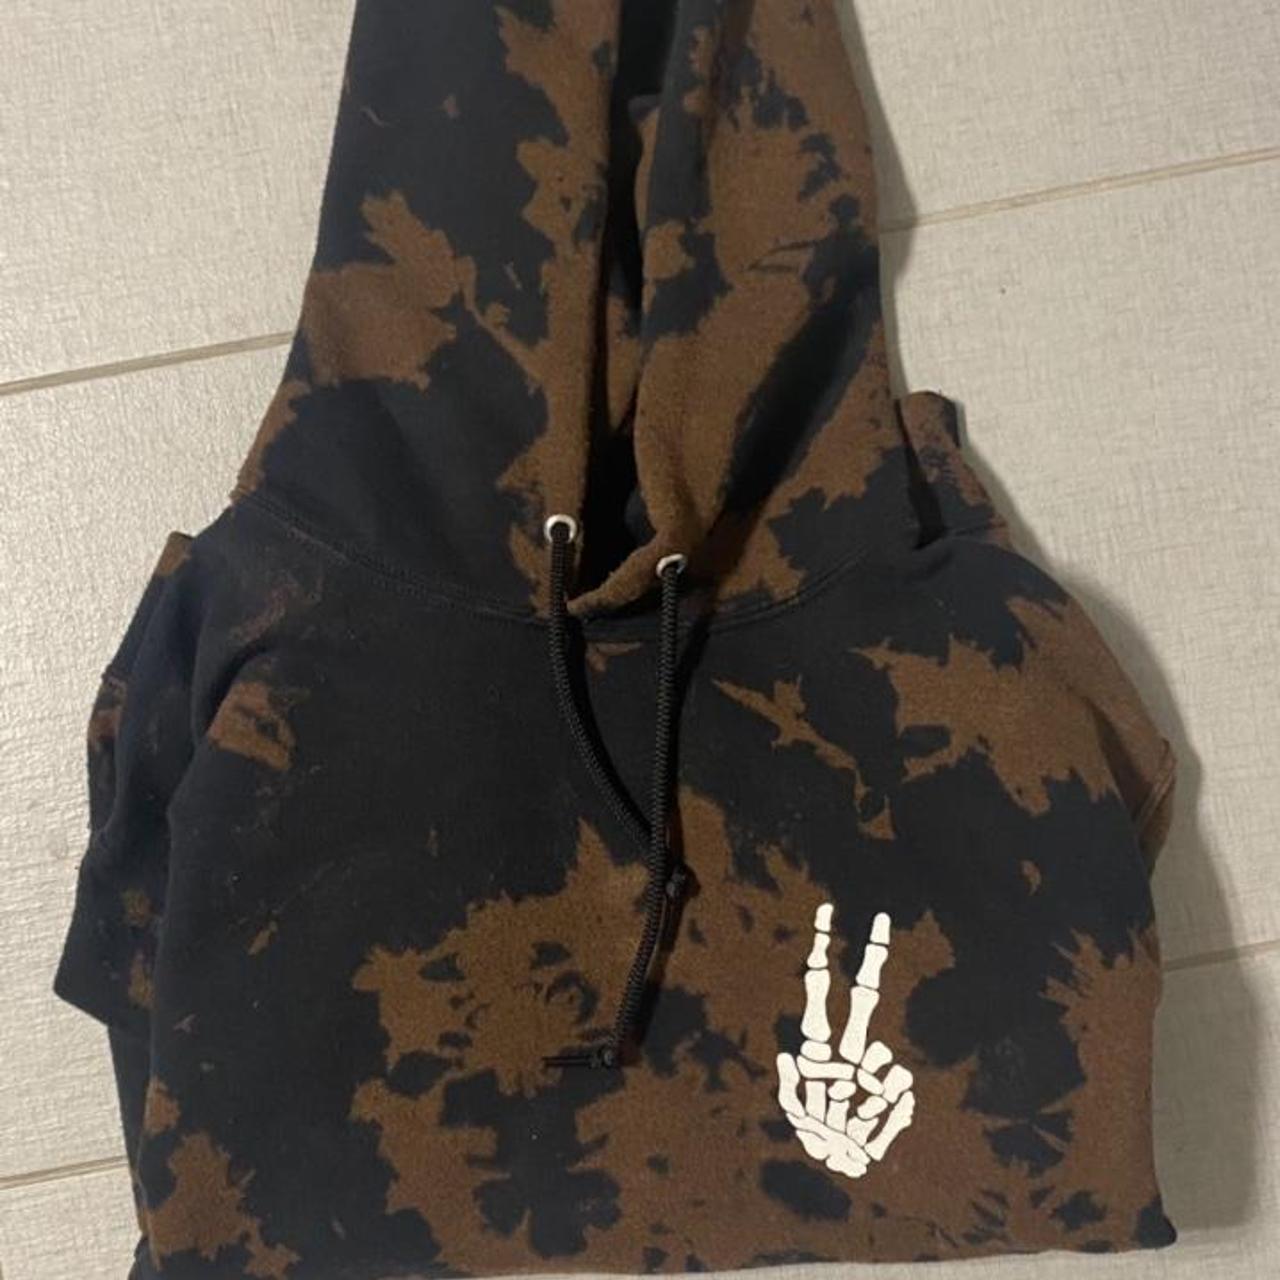 Product Image 1 - Size small hoodie from Marshall’s
Great